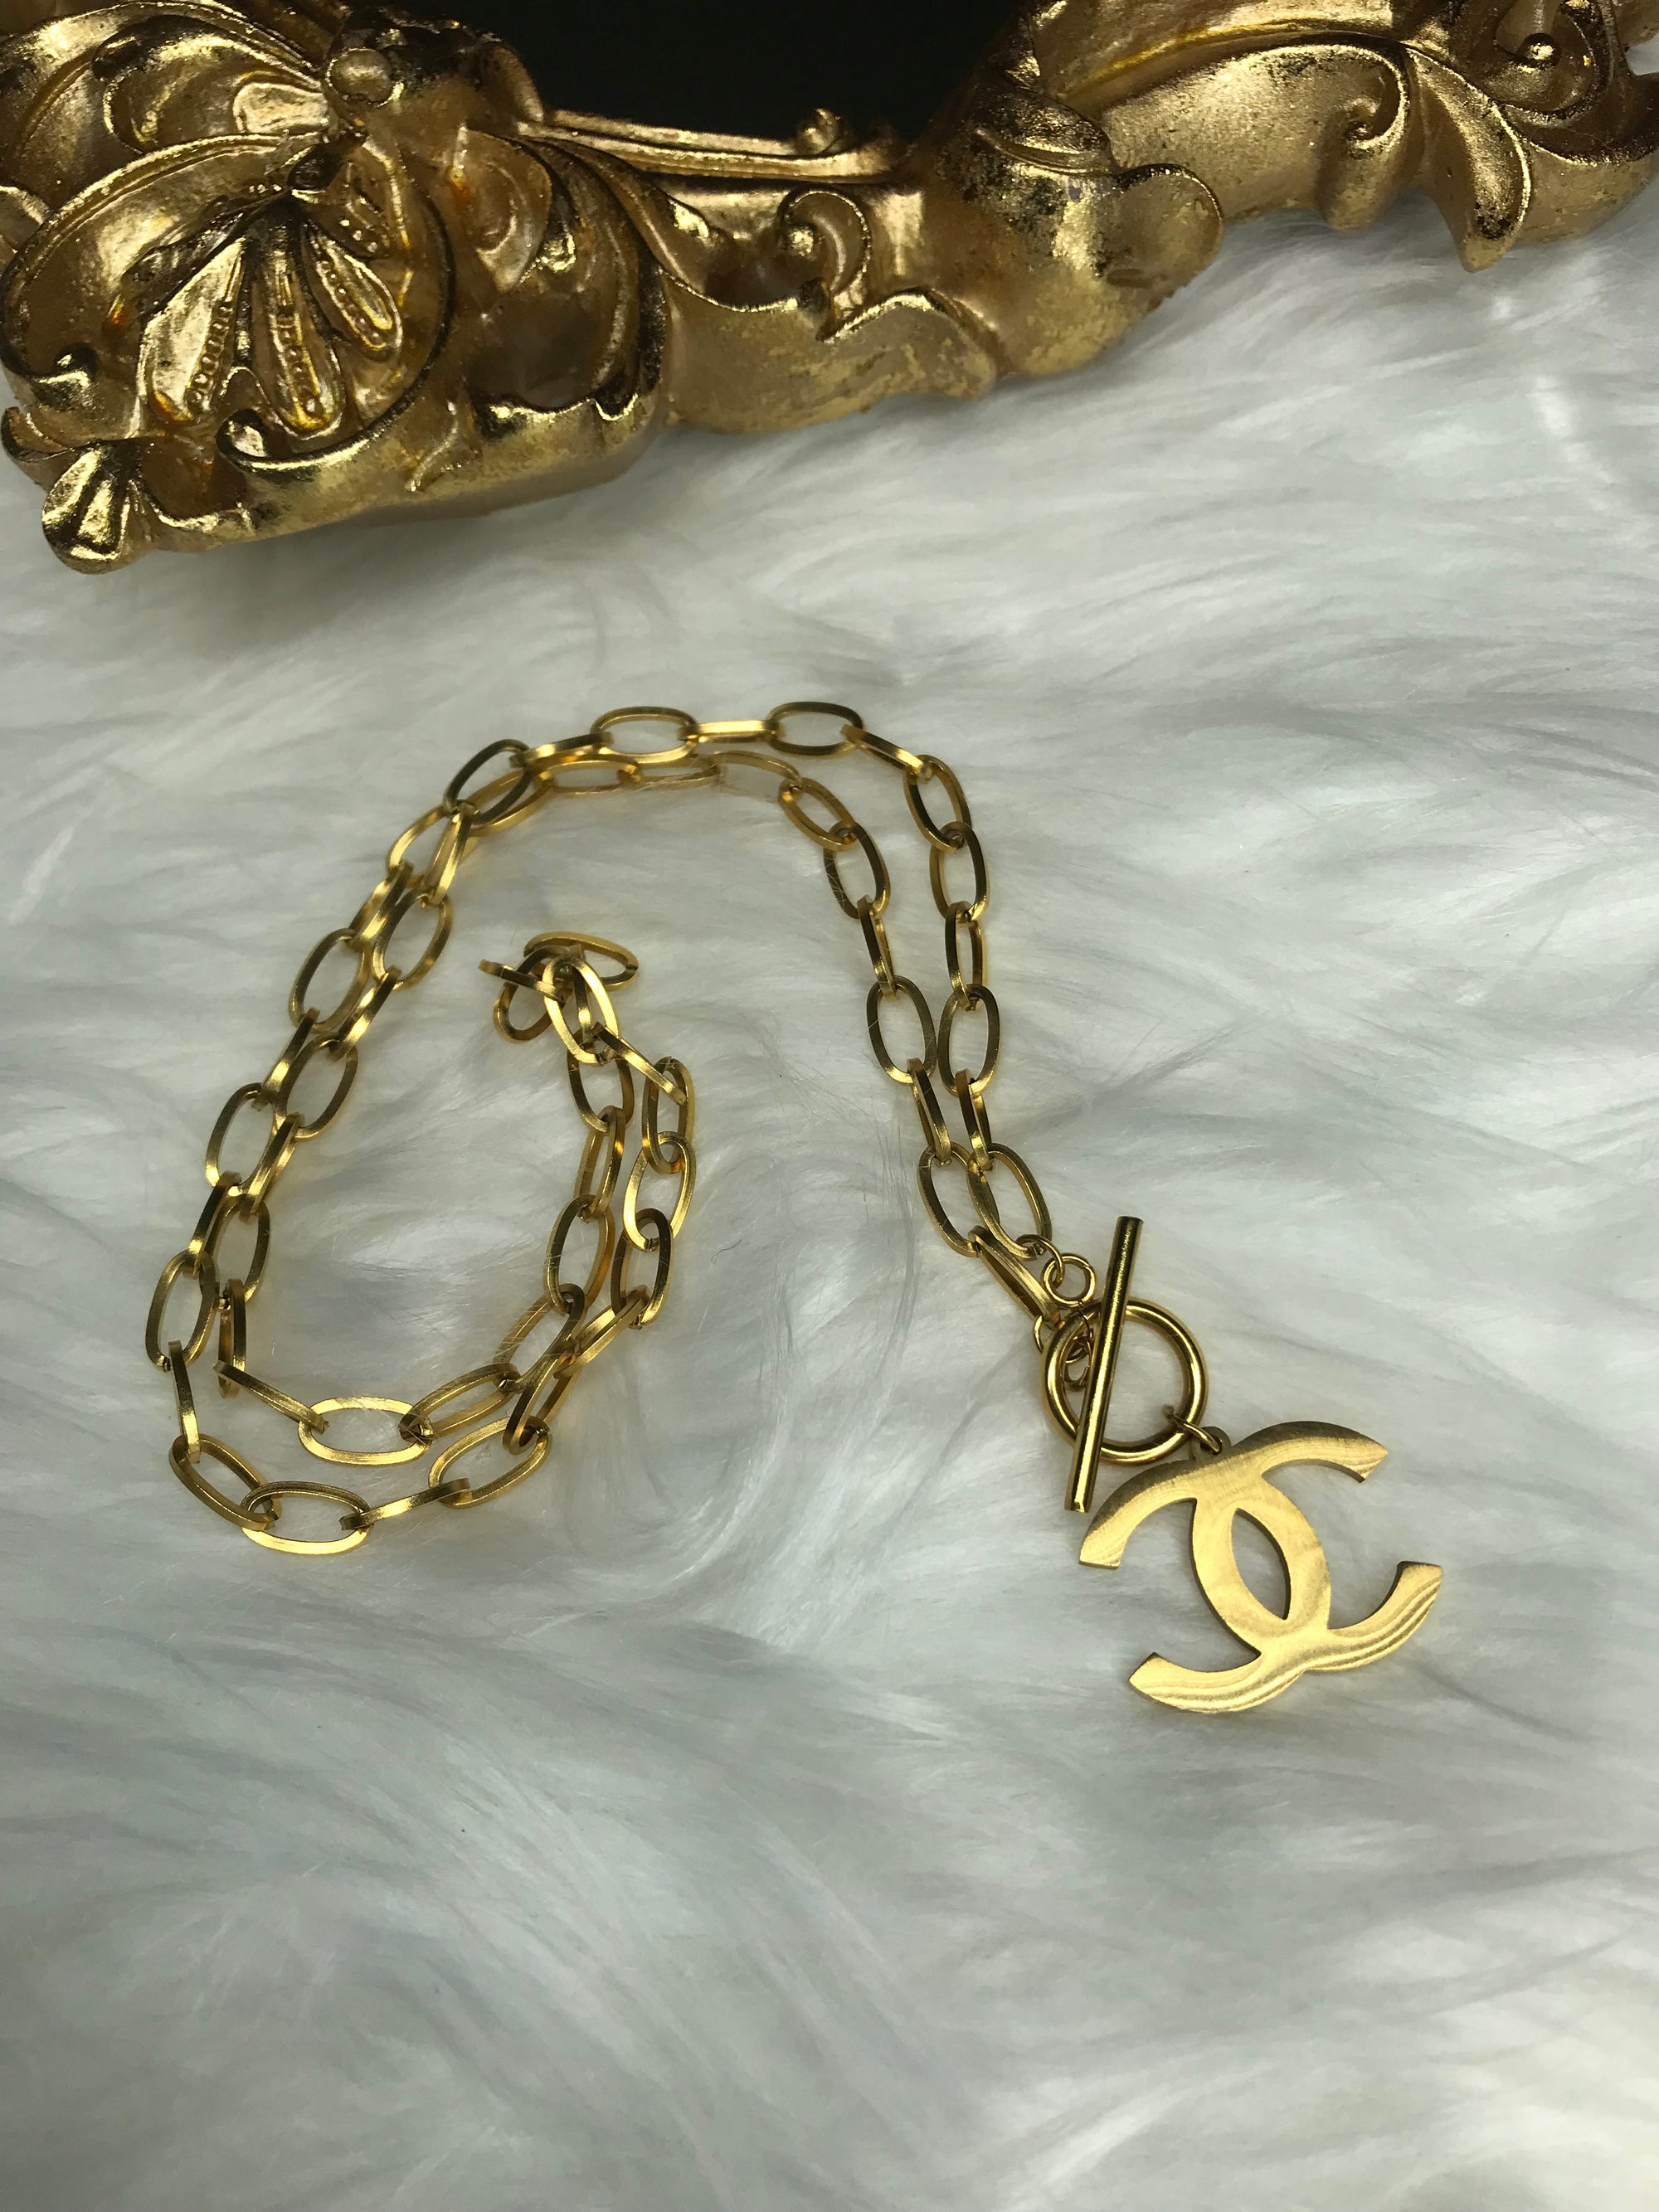 CHANEL Crystal Gold Fashion Necklaces & Pendants for sale | eBay